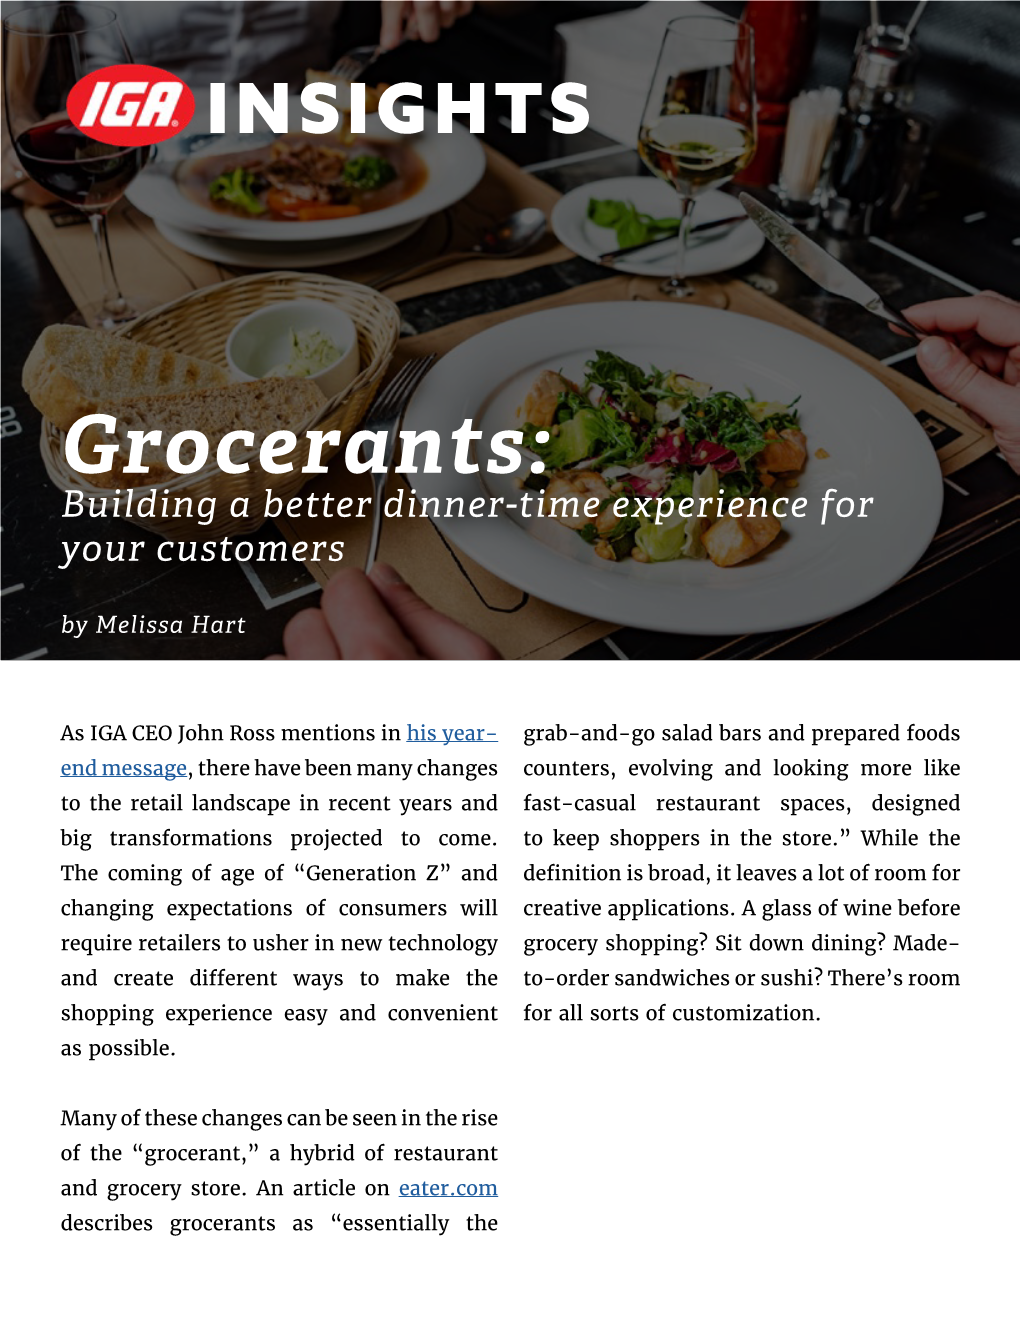 Grocerants: Building a Better Dinner-Time Experience for Your Customers